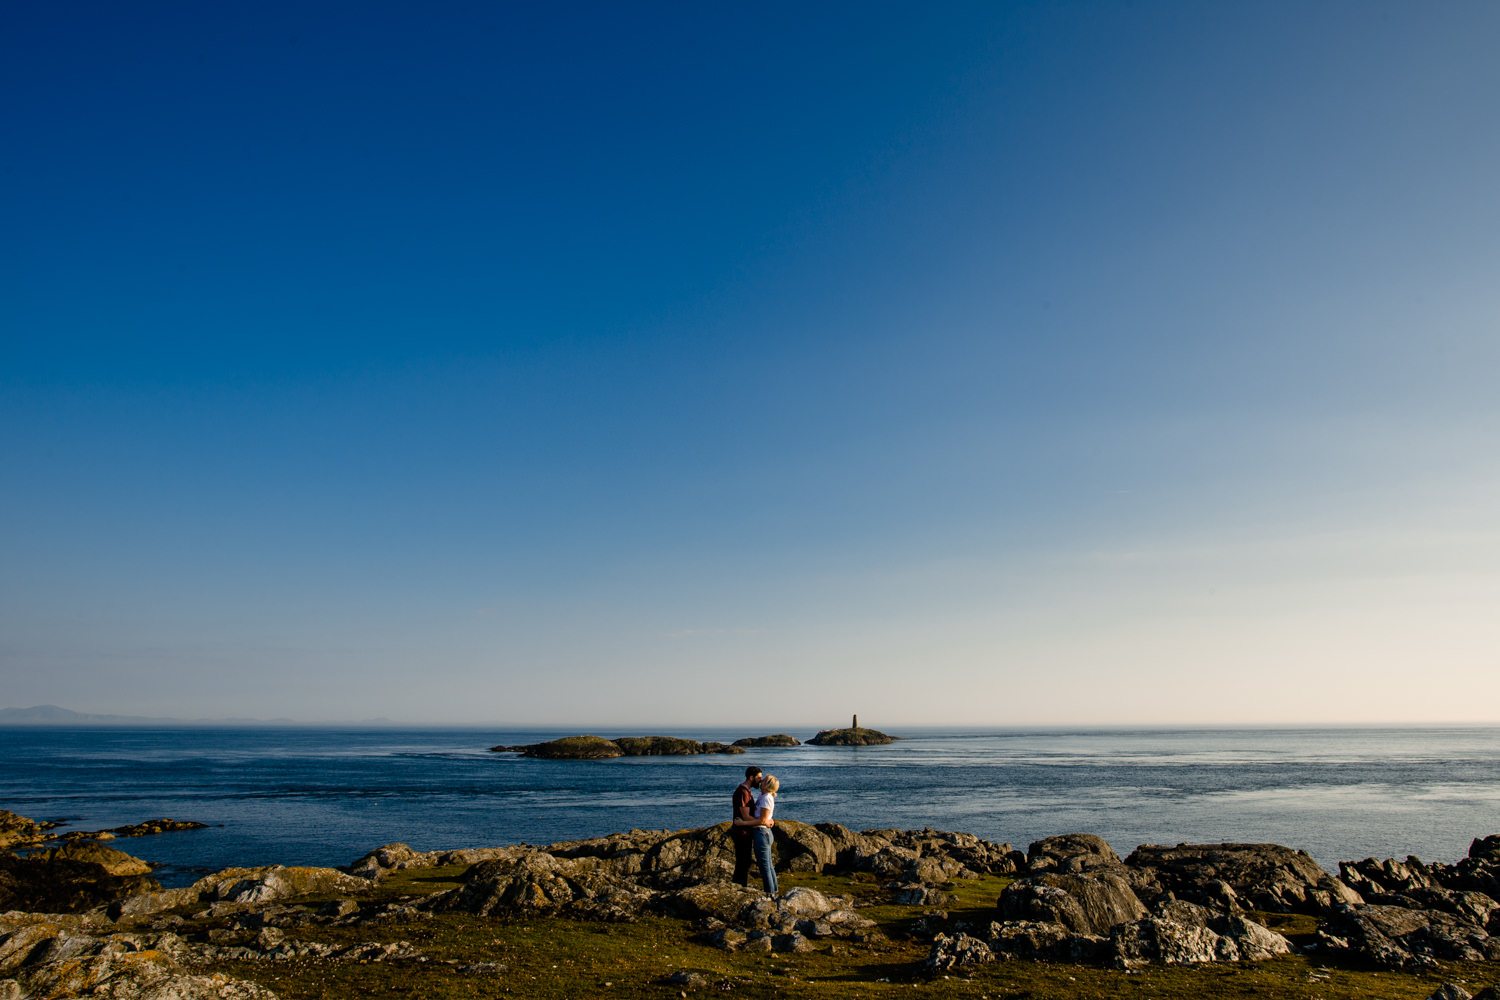 A view from the headland looking out to sea, from Kate & Sean's sunny pre wedding shoot on Holy Island, by Anglesey wedding photographers Zoe & Tom